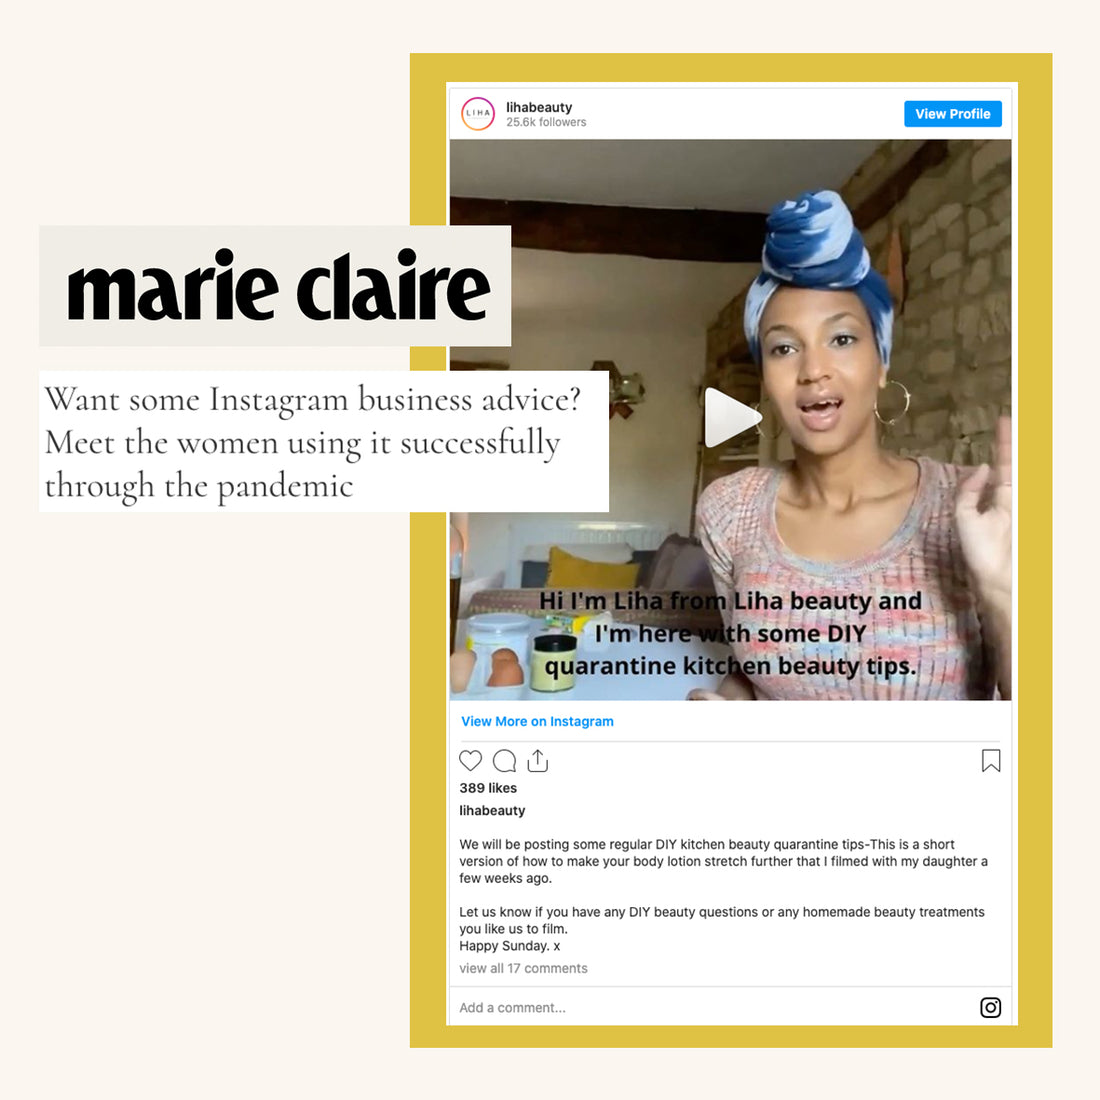 MARIE CLAIRE: Want some Instagram business advice?